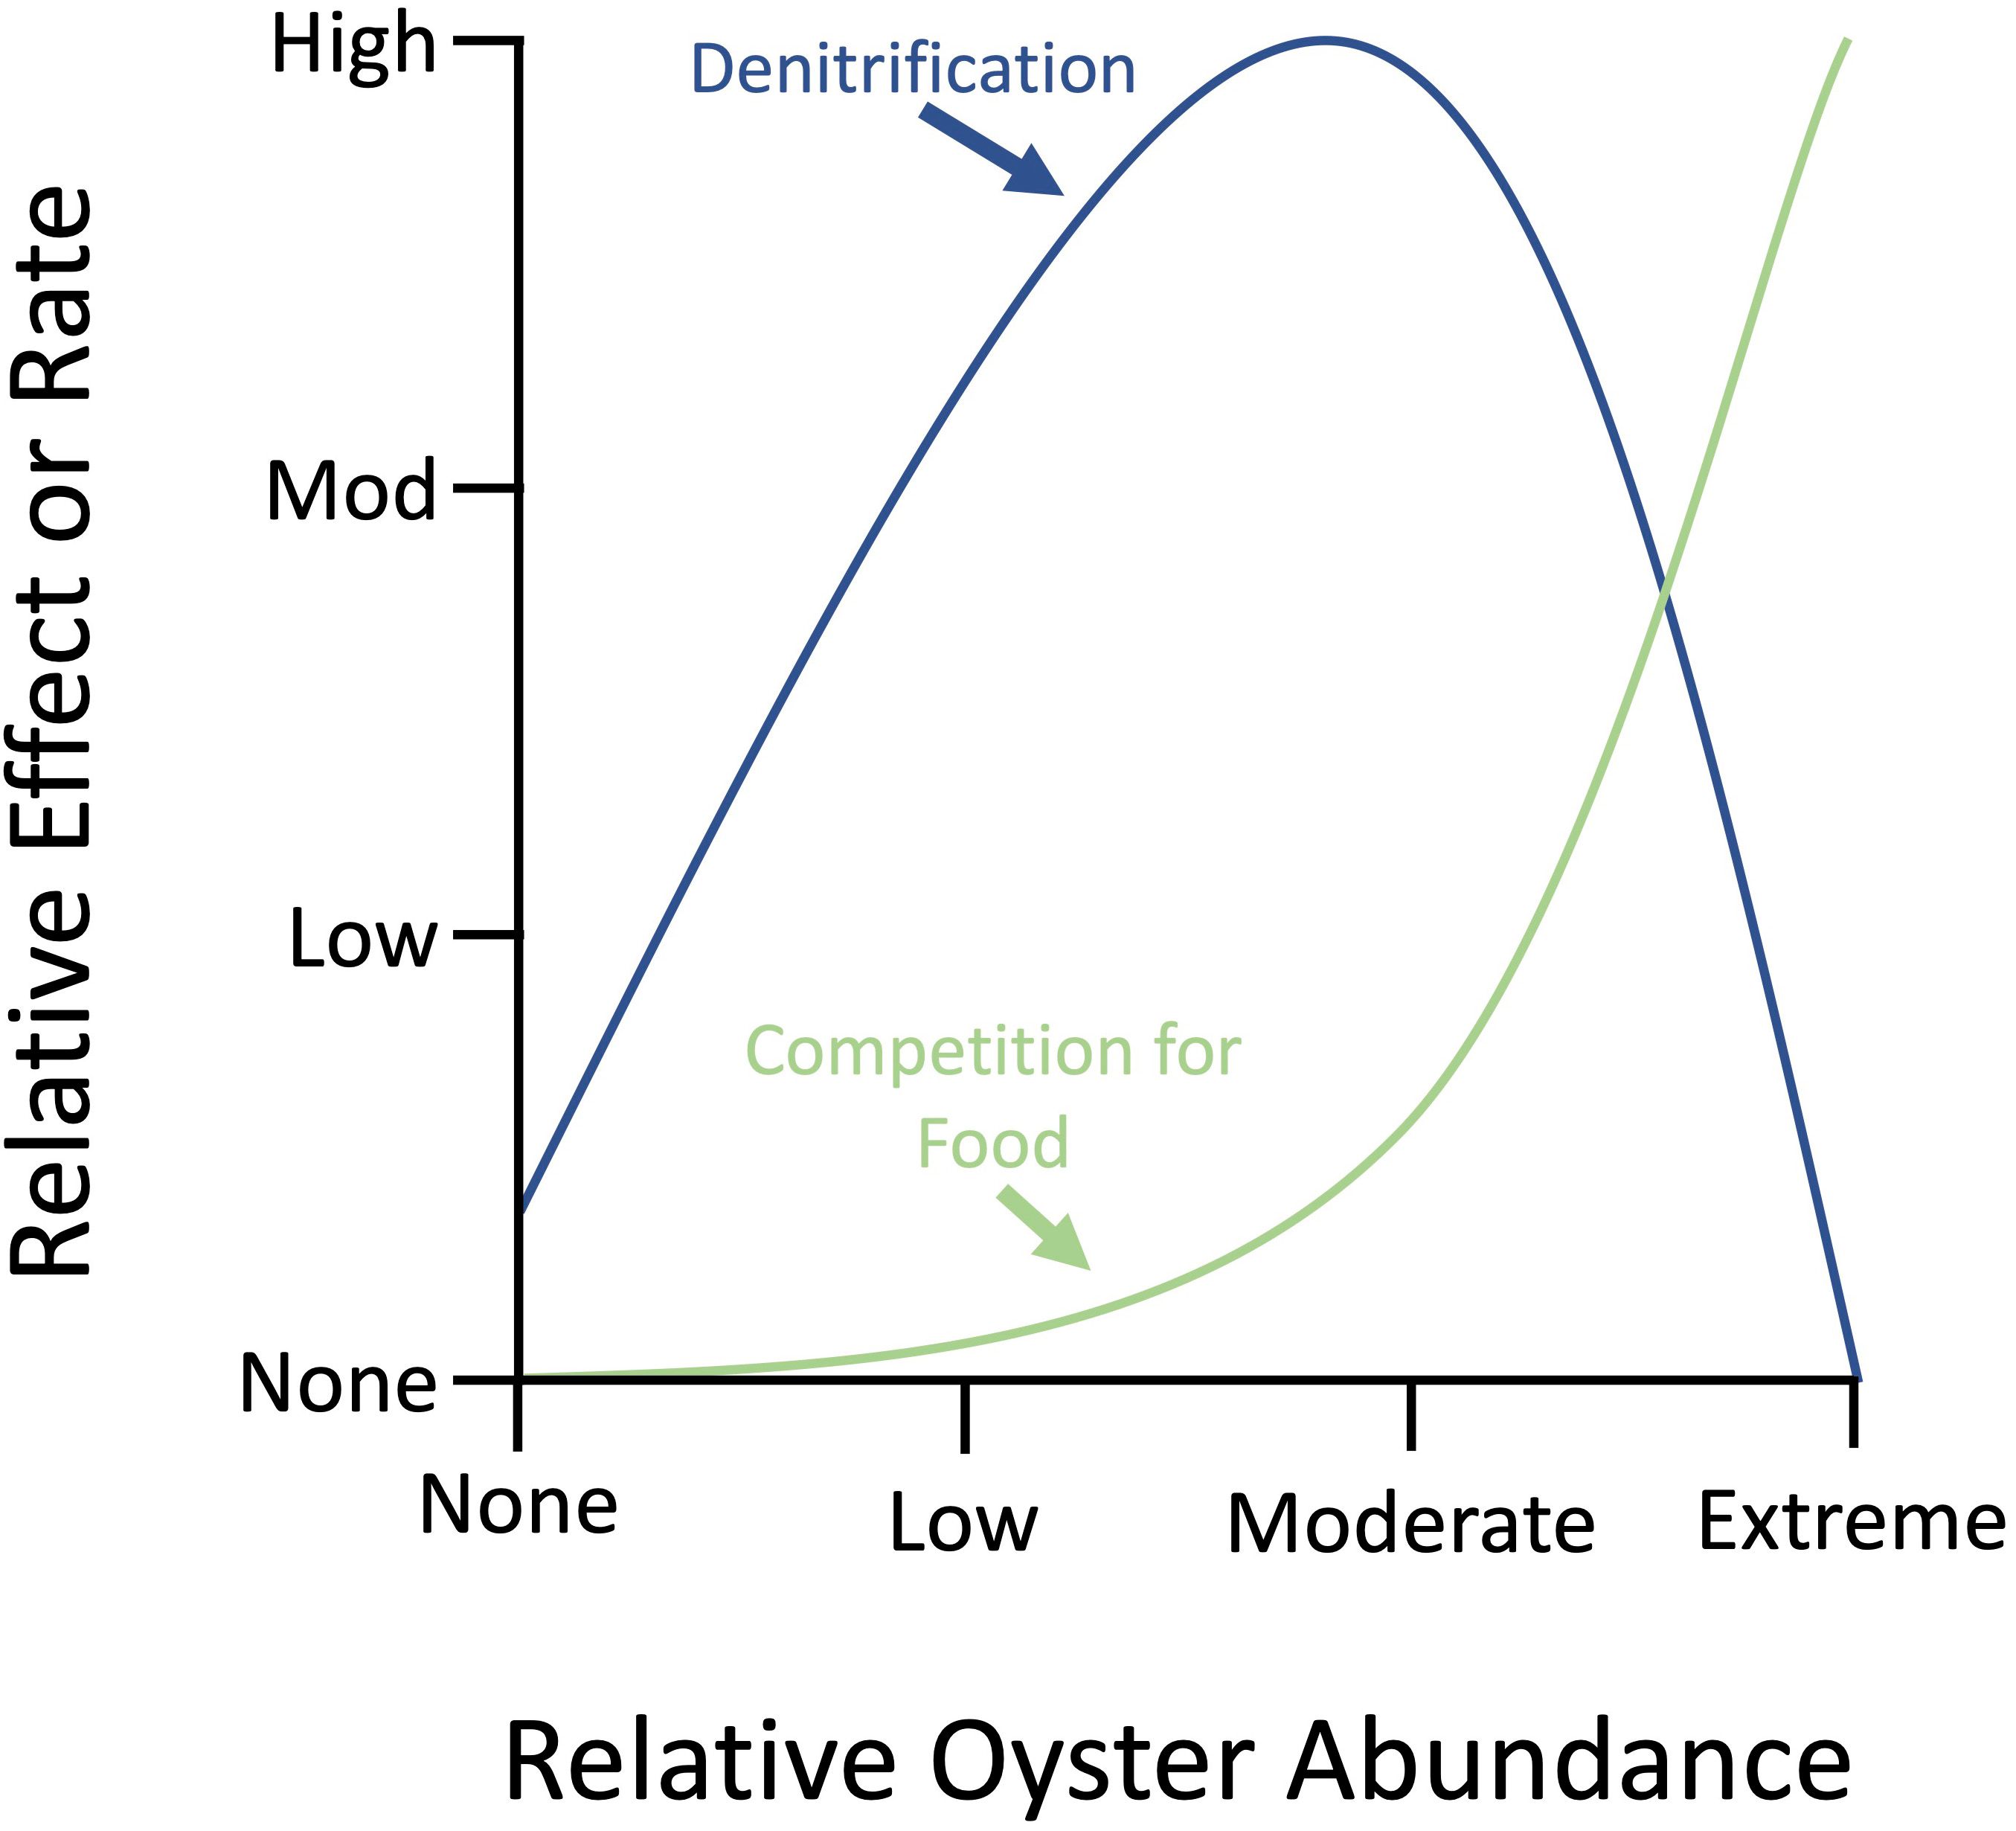 Effect of increasing oyster abundance on food and denitrification. At high oyster abundances, competition for food may exist. In locations with heavy biodeposition from extreme oyster abundance, sediment oxygen and denitrification will decline. 